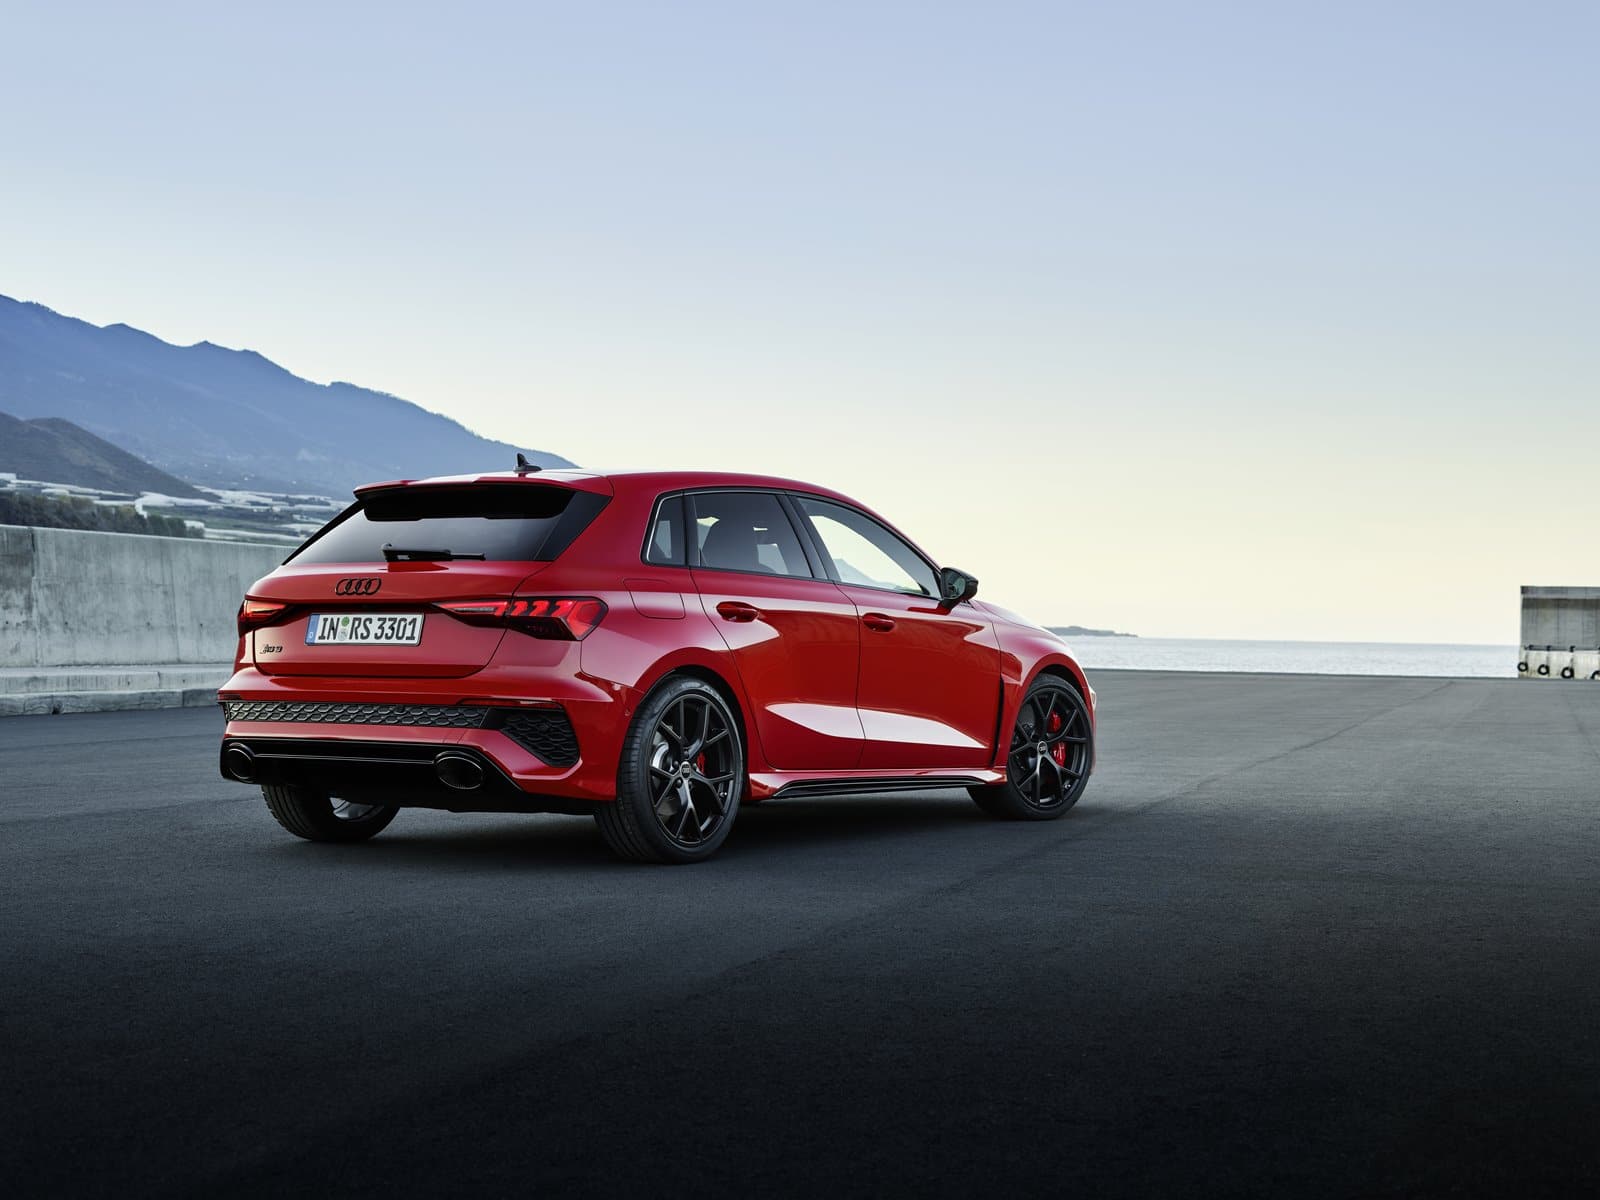 new red Audi RS 3 sportback